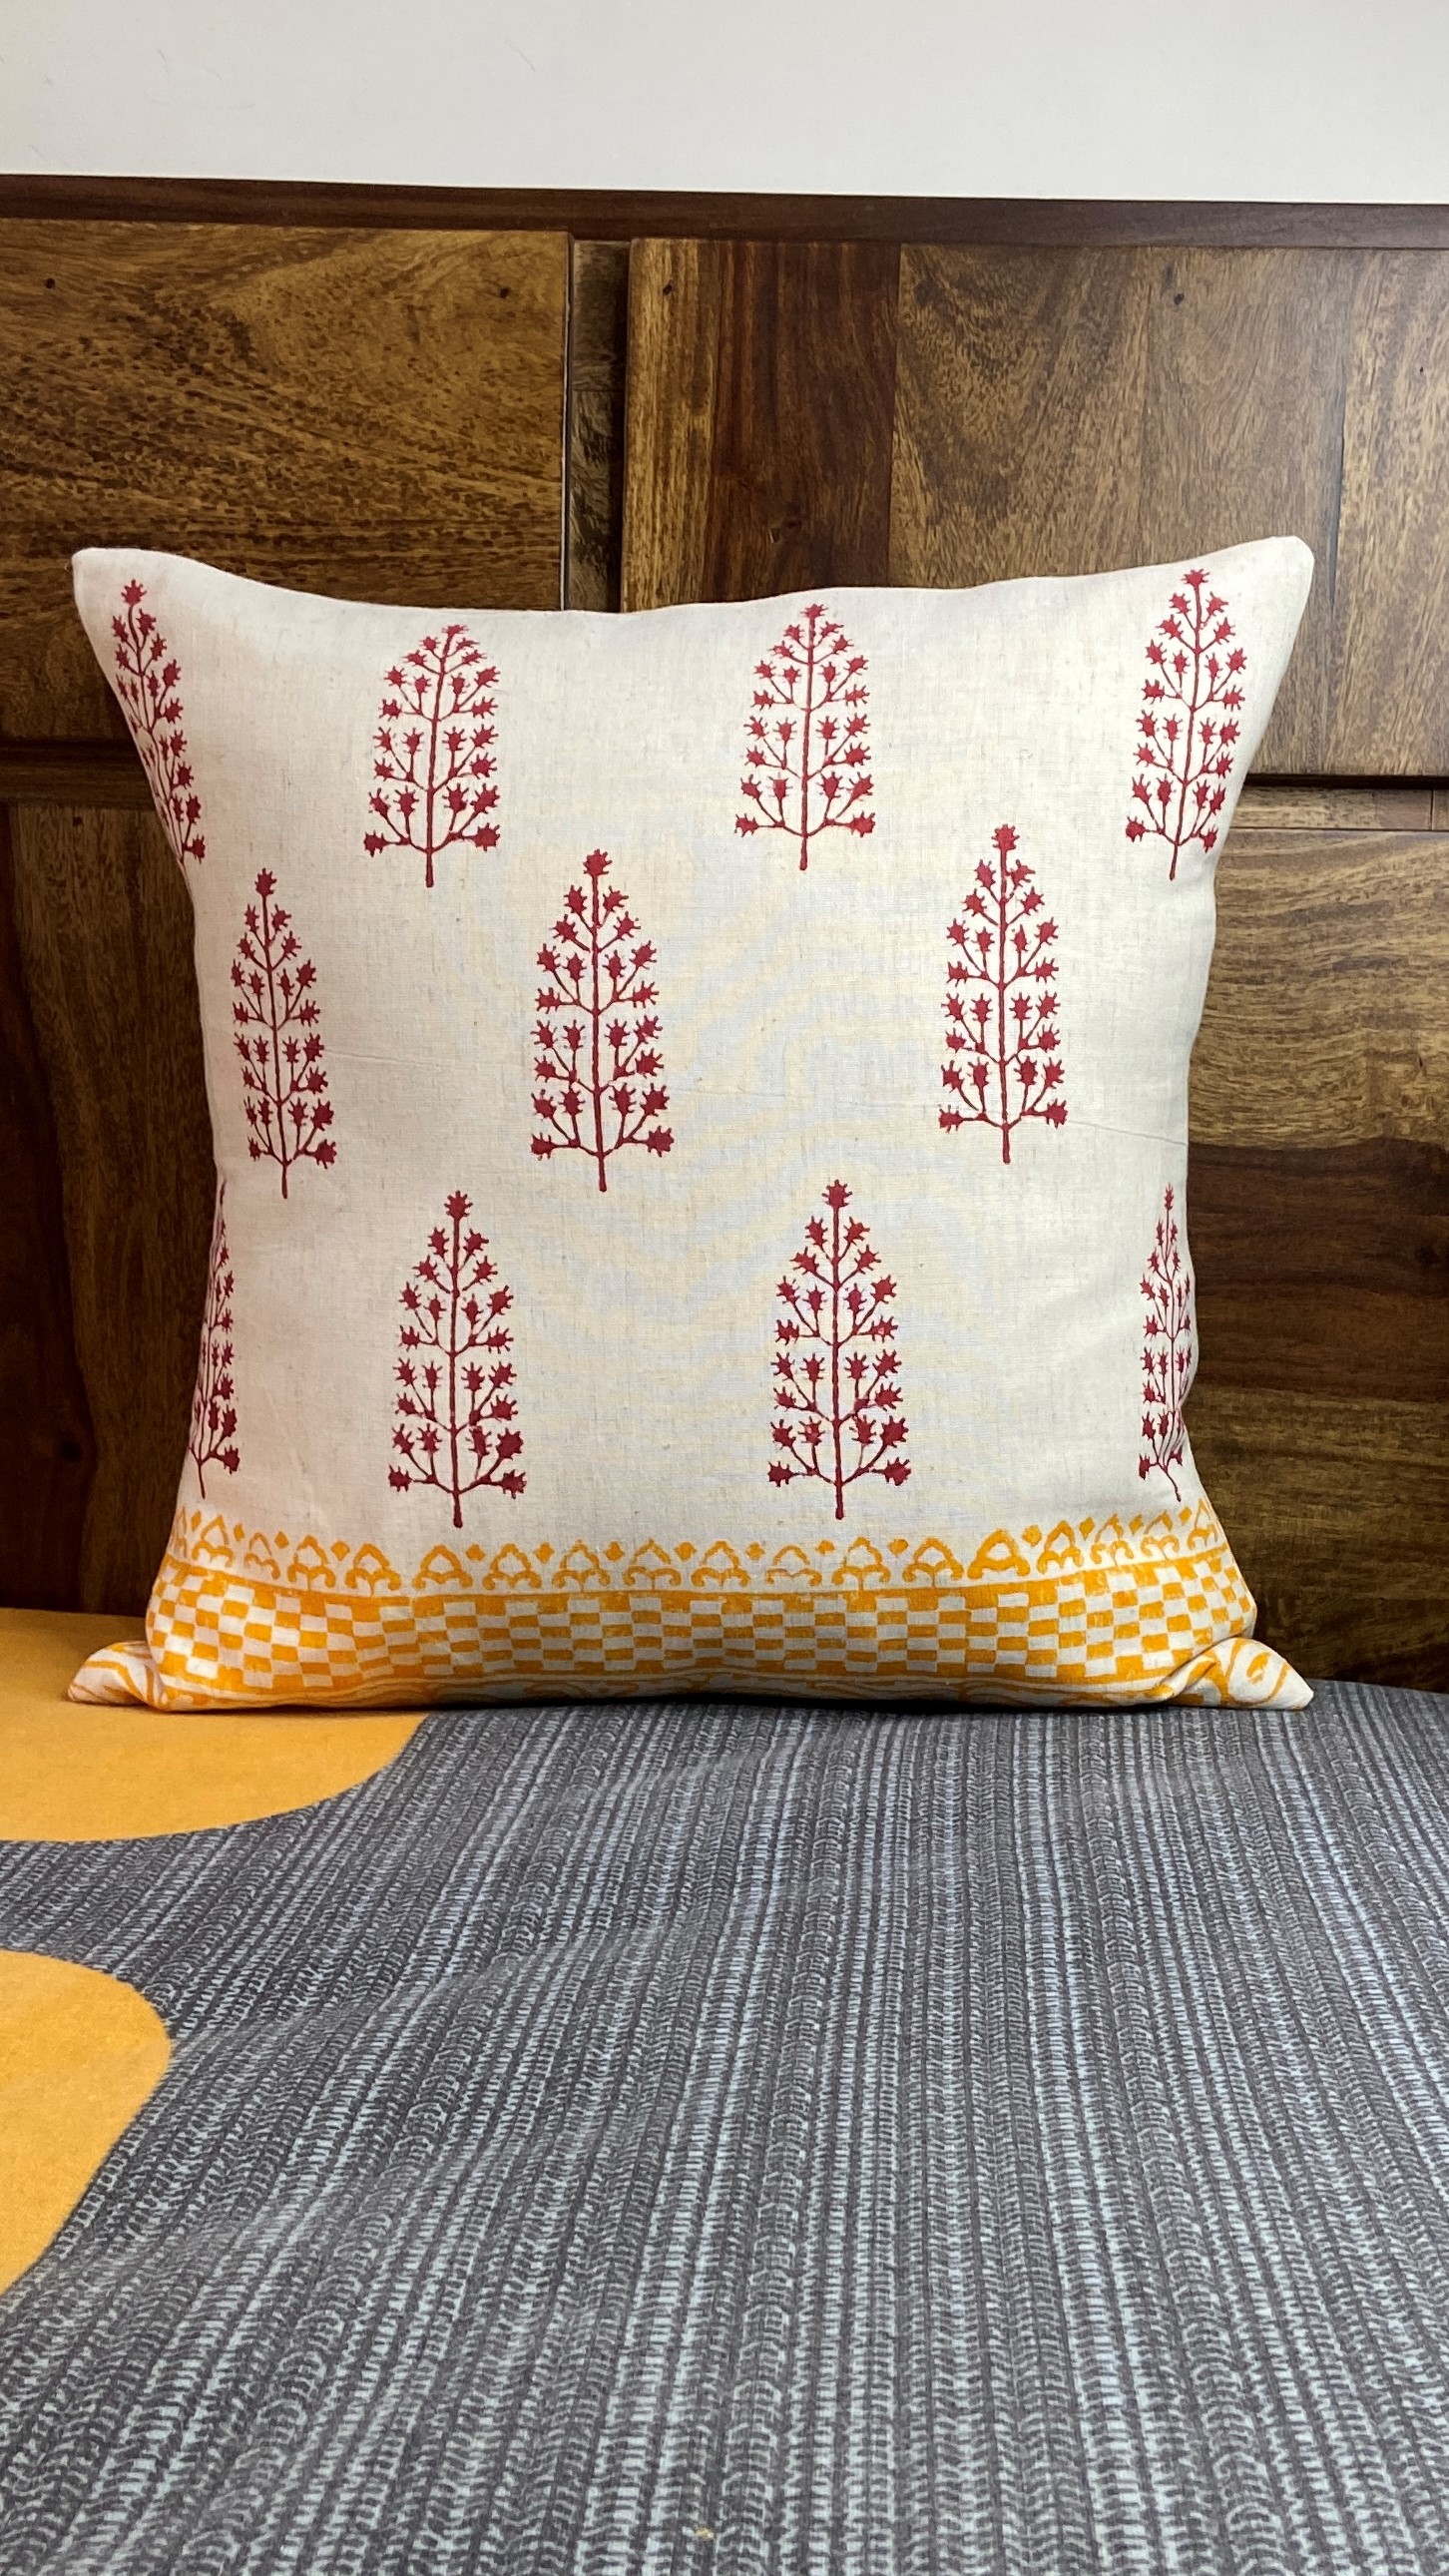 Beautifully Hand Embroidered Kandil Design on Linen Cushion Cover